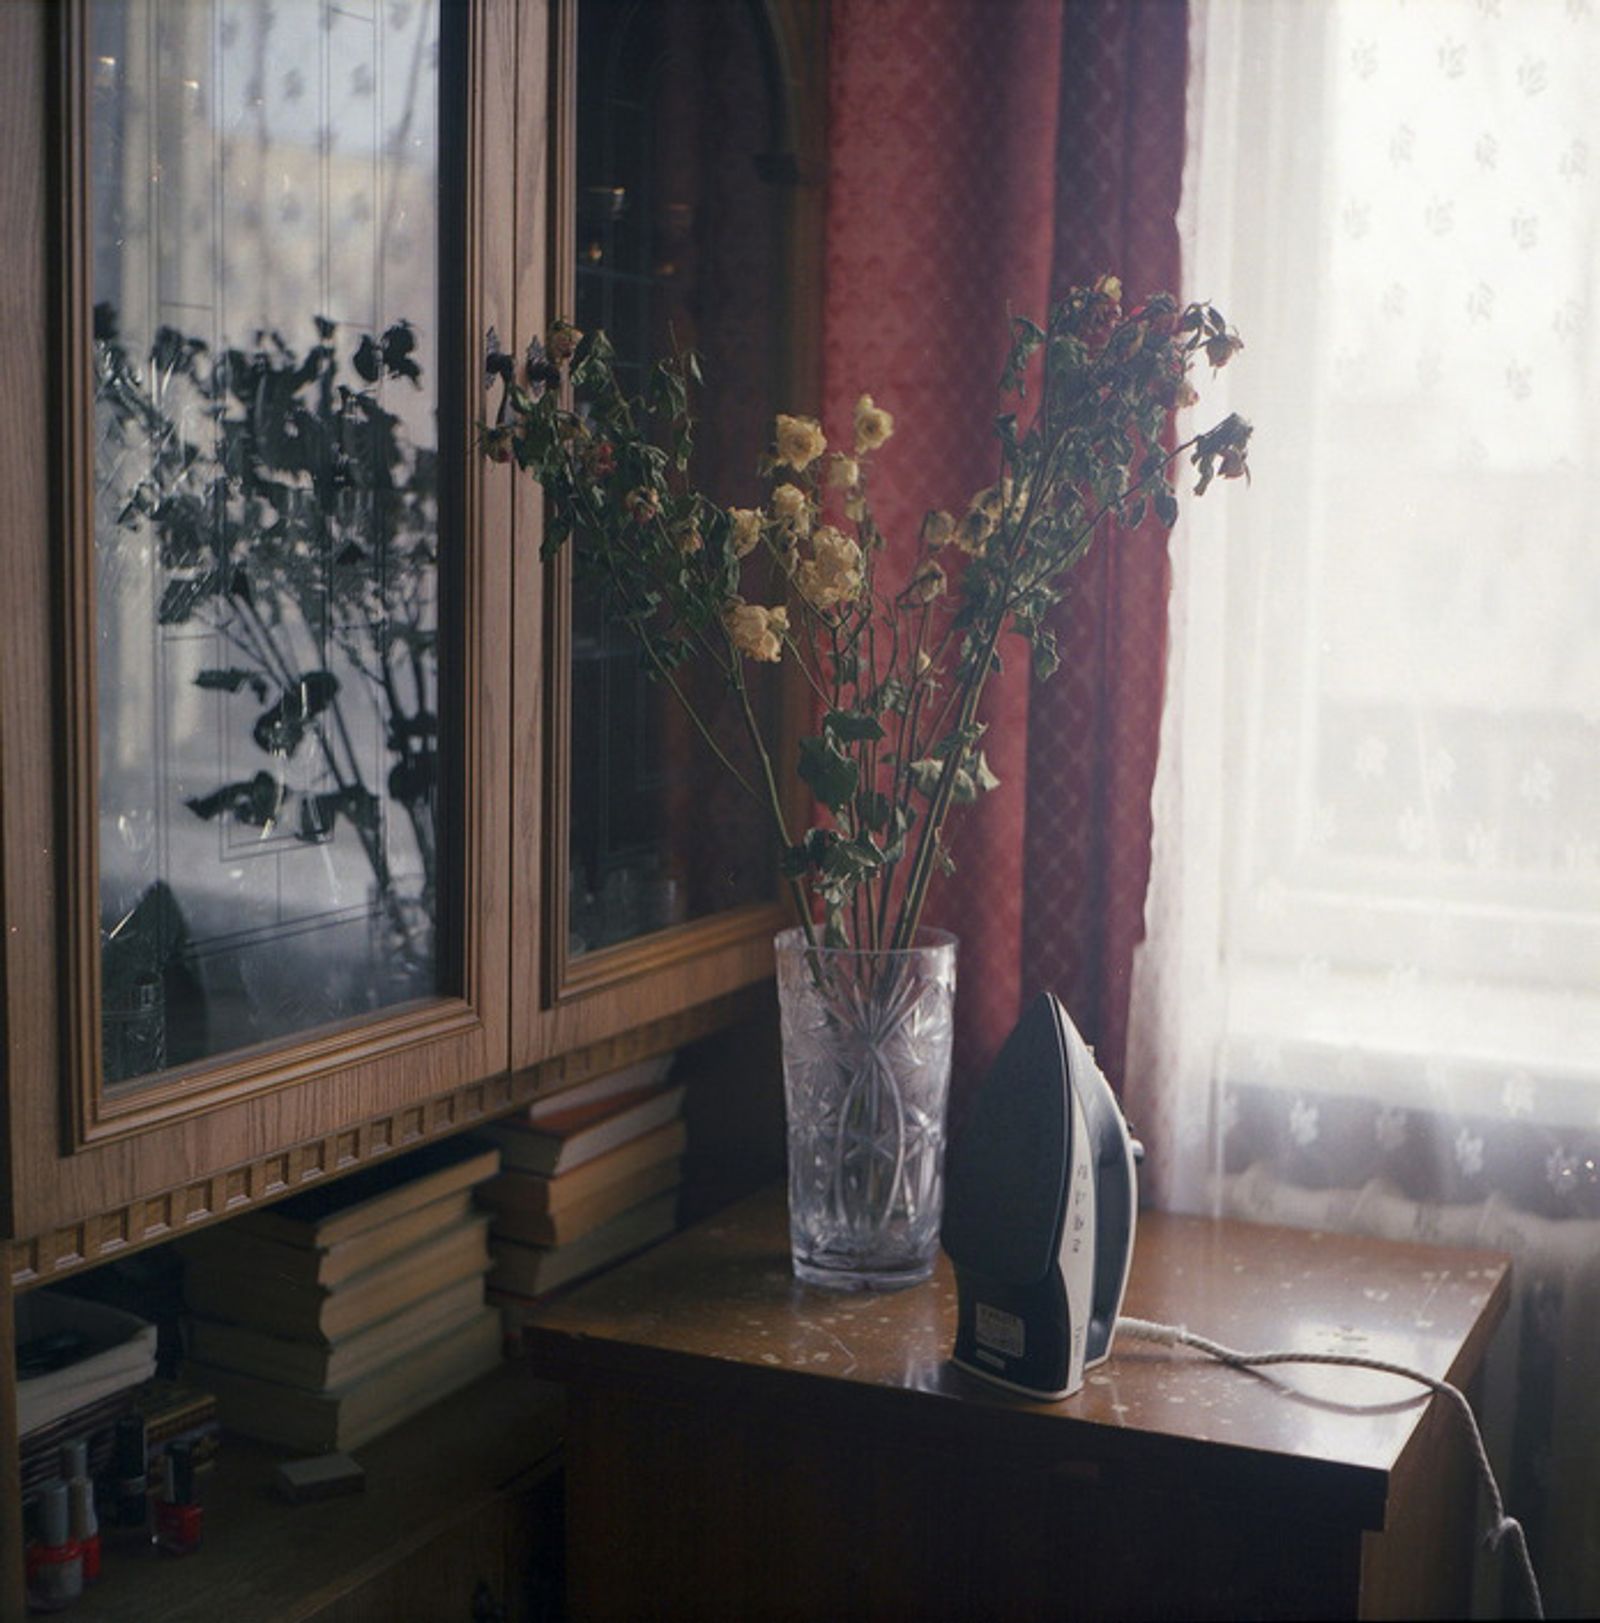 © Kate Dmitrieva - Image from the Broken flowers  photography project